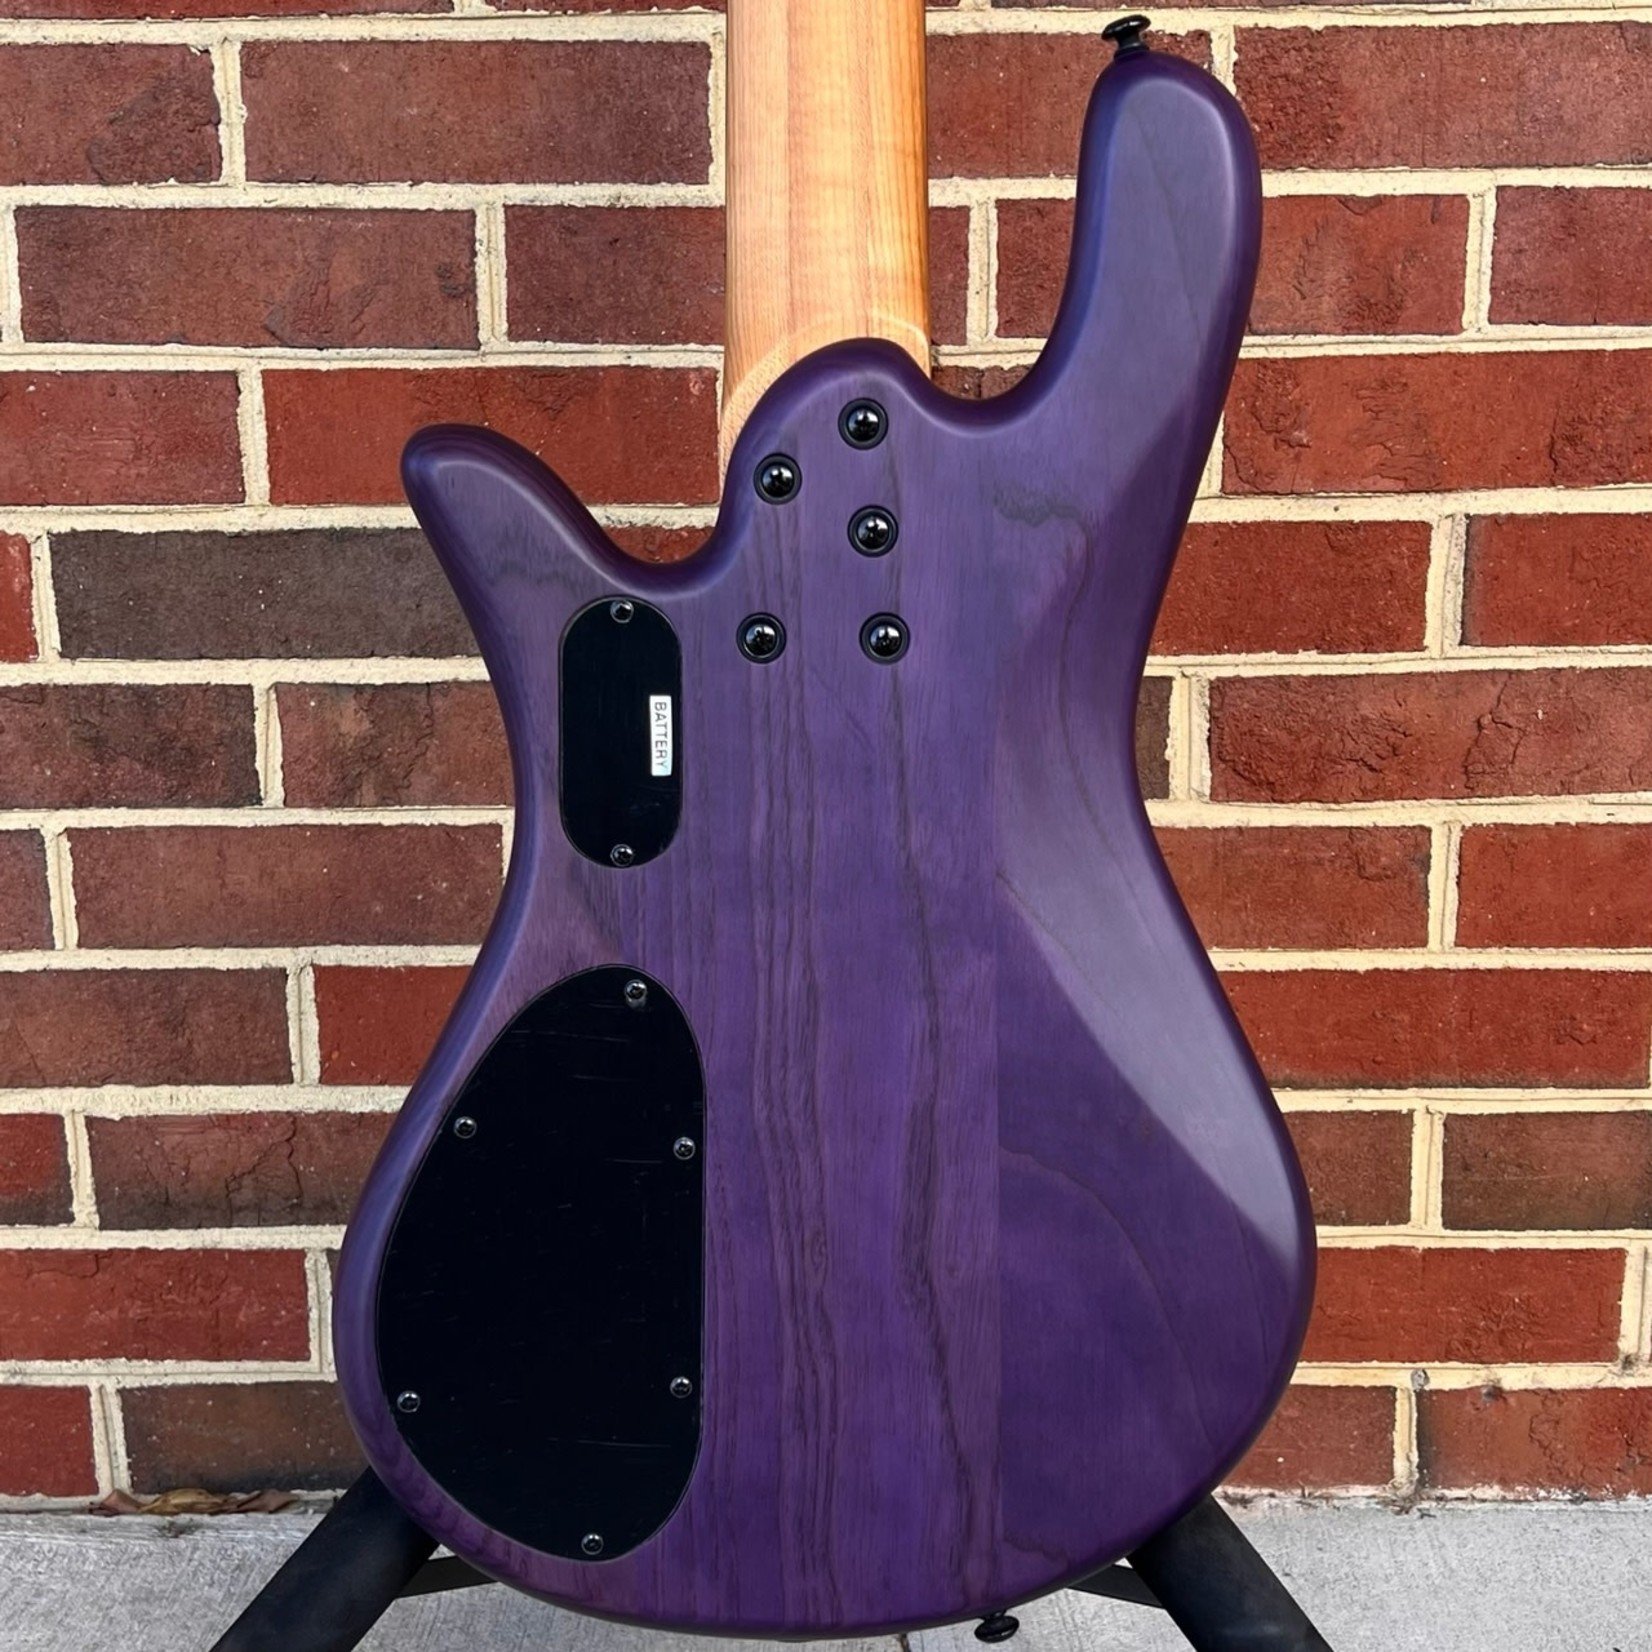 Spector Spector NS Pulse II 5-String, Ultra Violet Matte, Quilted Maple Top, Swamp Ash Body, Roasted Maple Neck, Macassar Ebony Fretboard, Gig Bag, SN# W211883